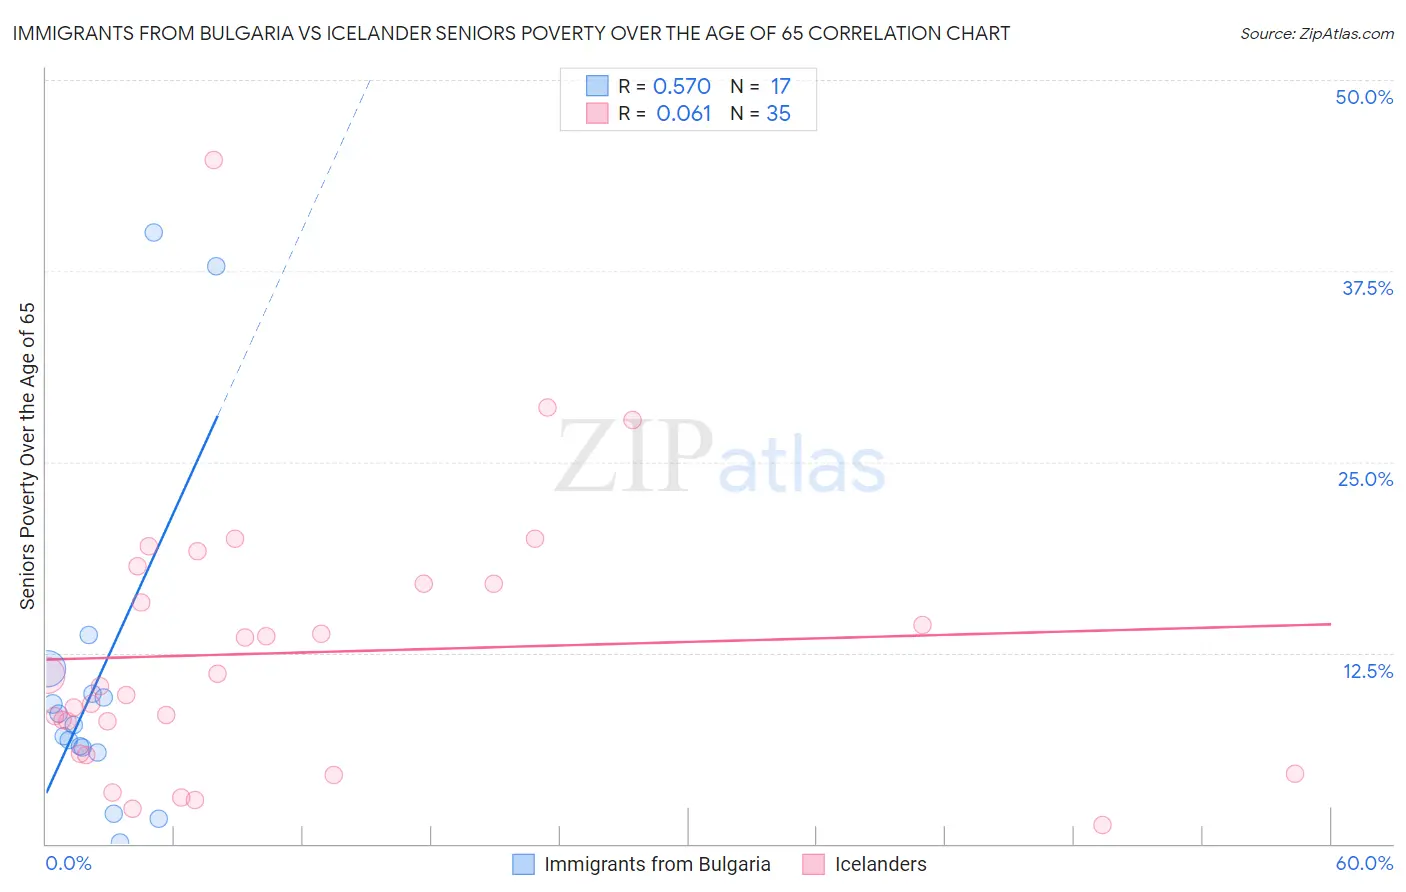 Immigrants from Bulgaria vs Icelander Seniors Poverty Over the Age of 65